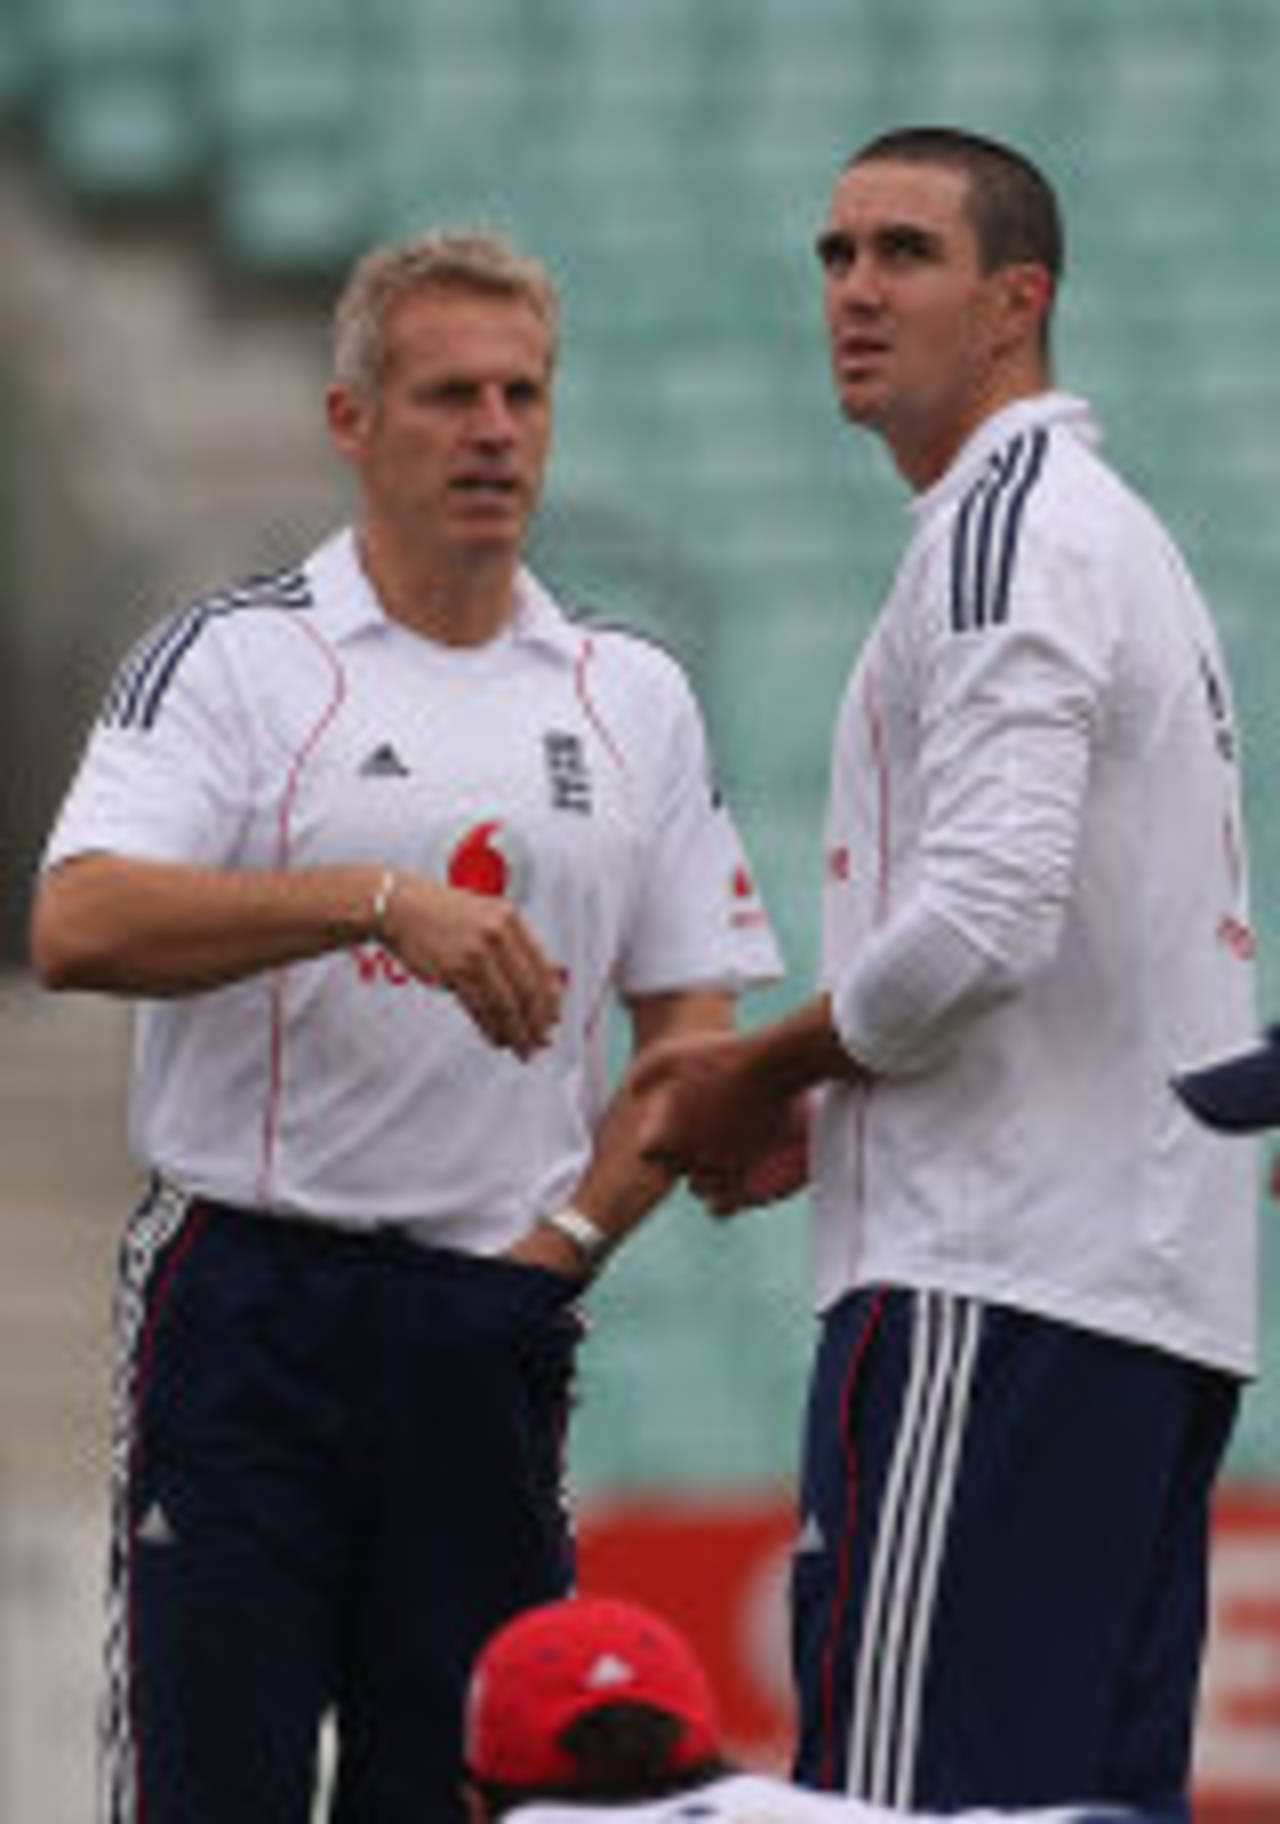 Peter Moores plots the downfall of South Africa with Kevin Pietersen on the eve of his first Test as England captain, England v South Africa, 4th Test, The Oval, August 6, 2008